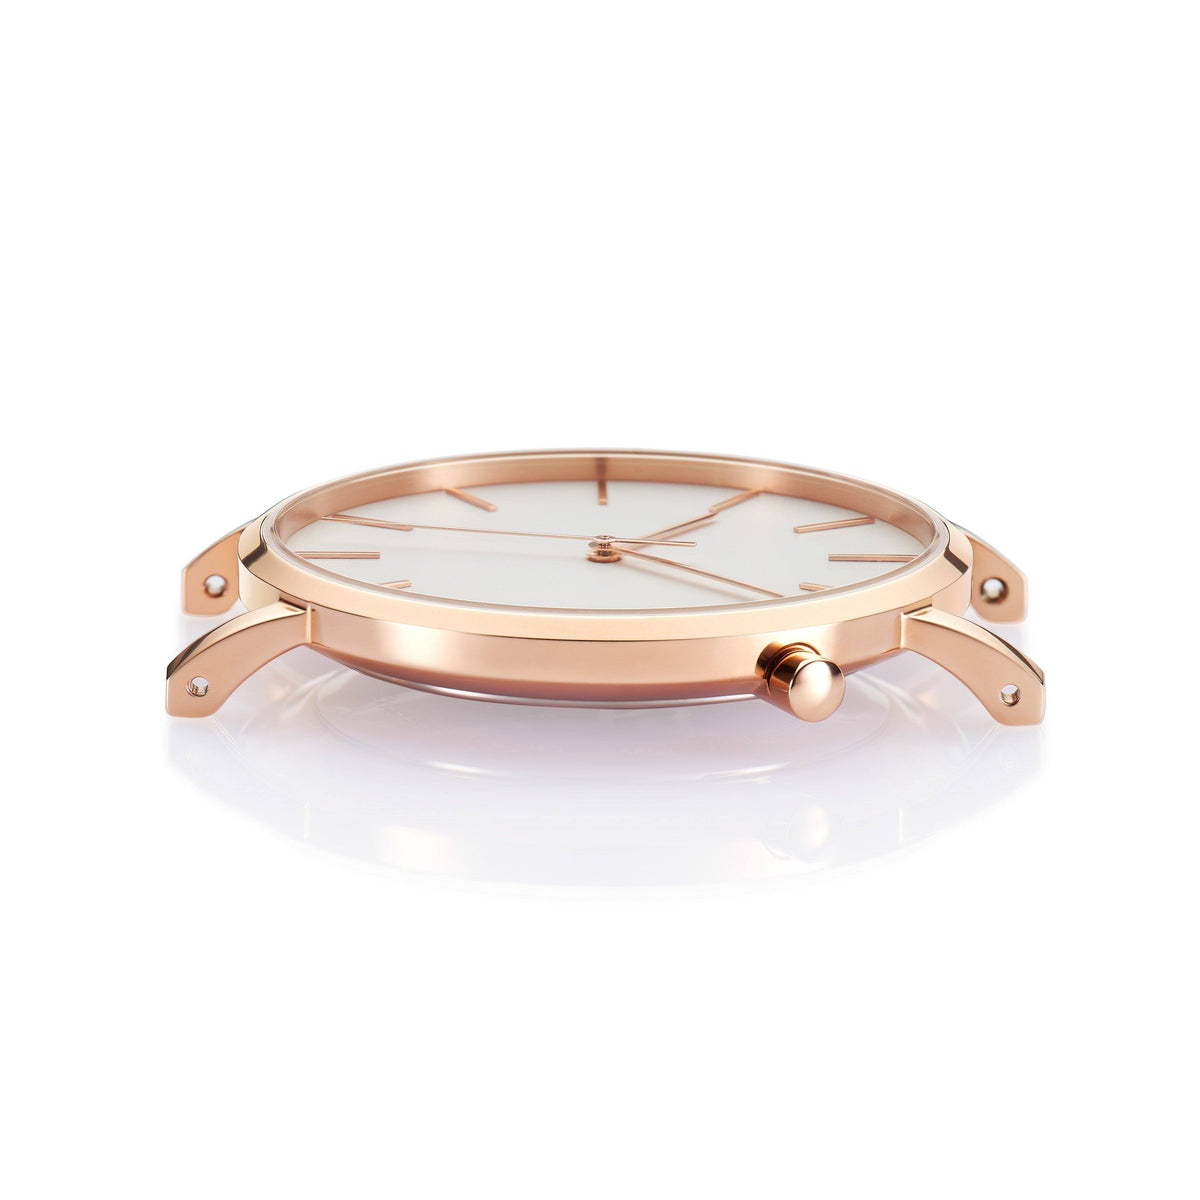 The White and Rose Gold Watch - Leather